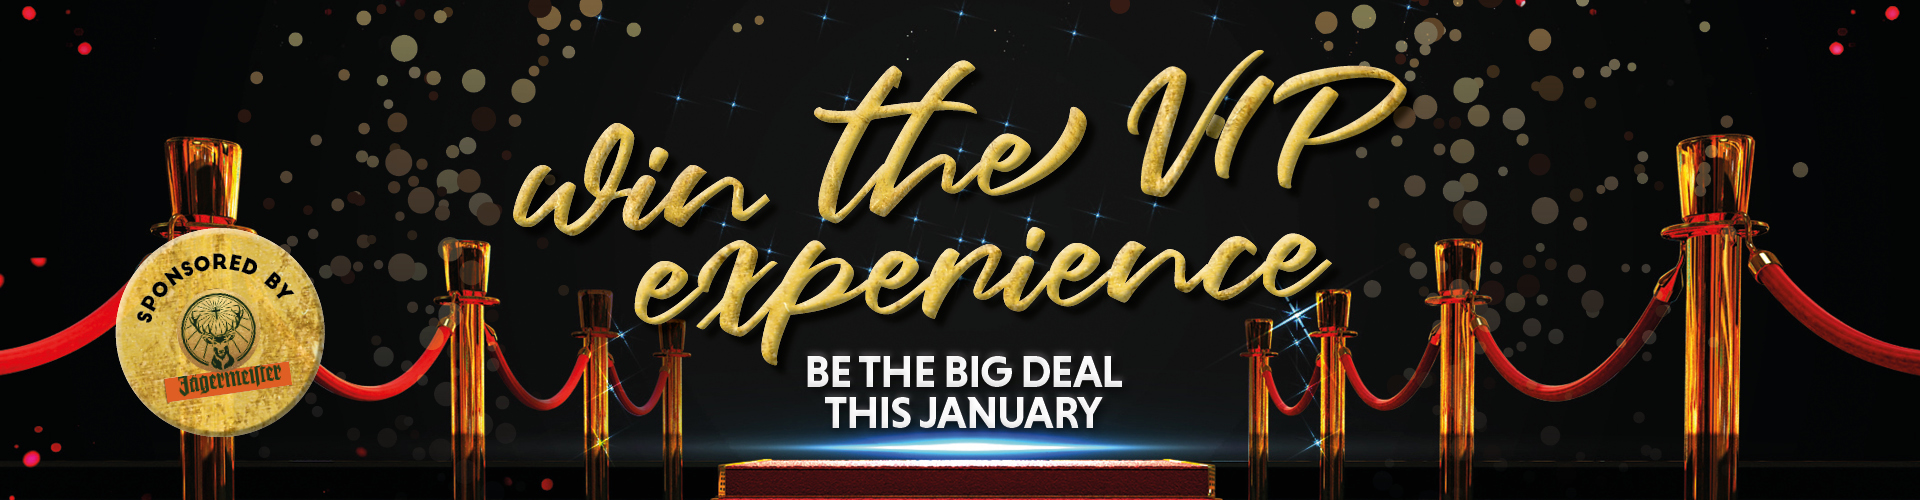 Win the VIP experience! Be the Big Deal this January